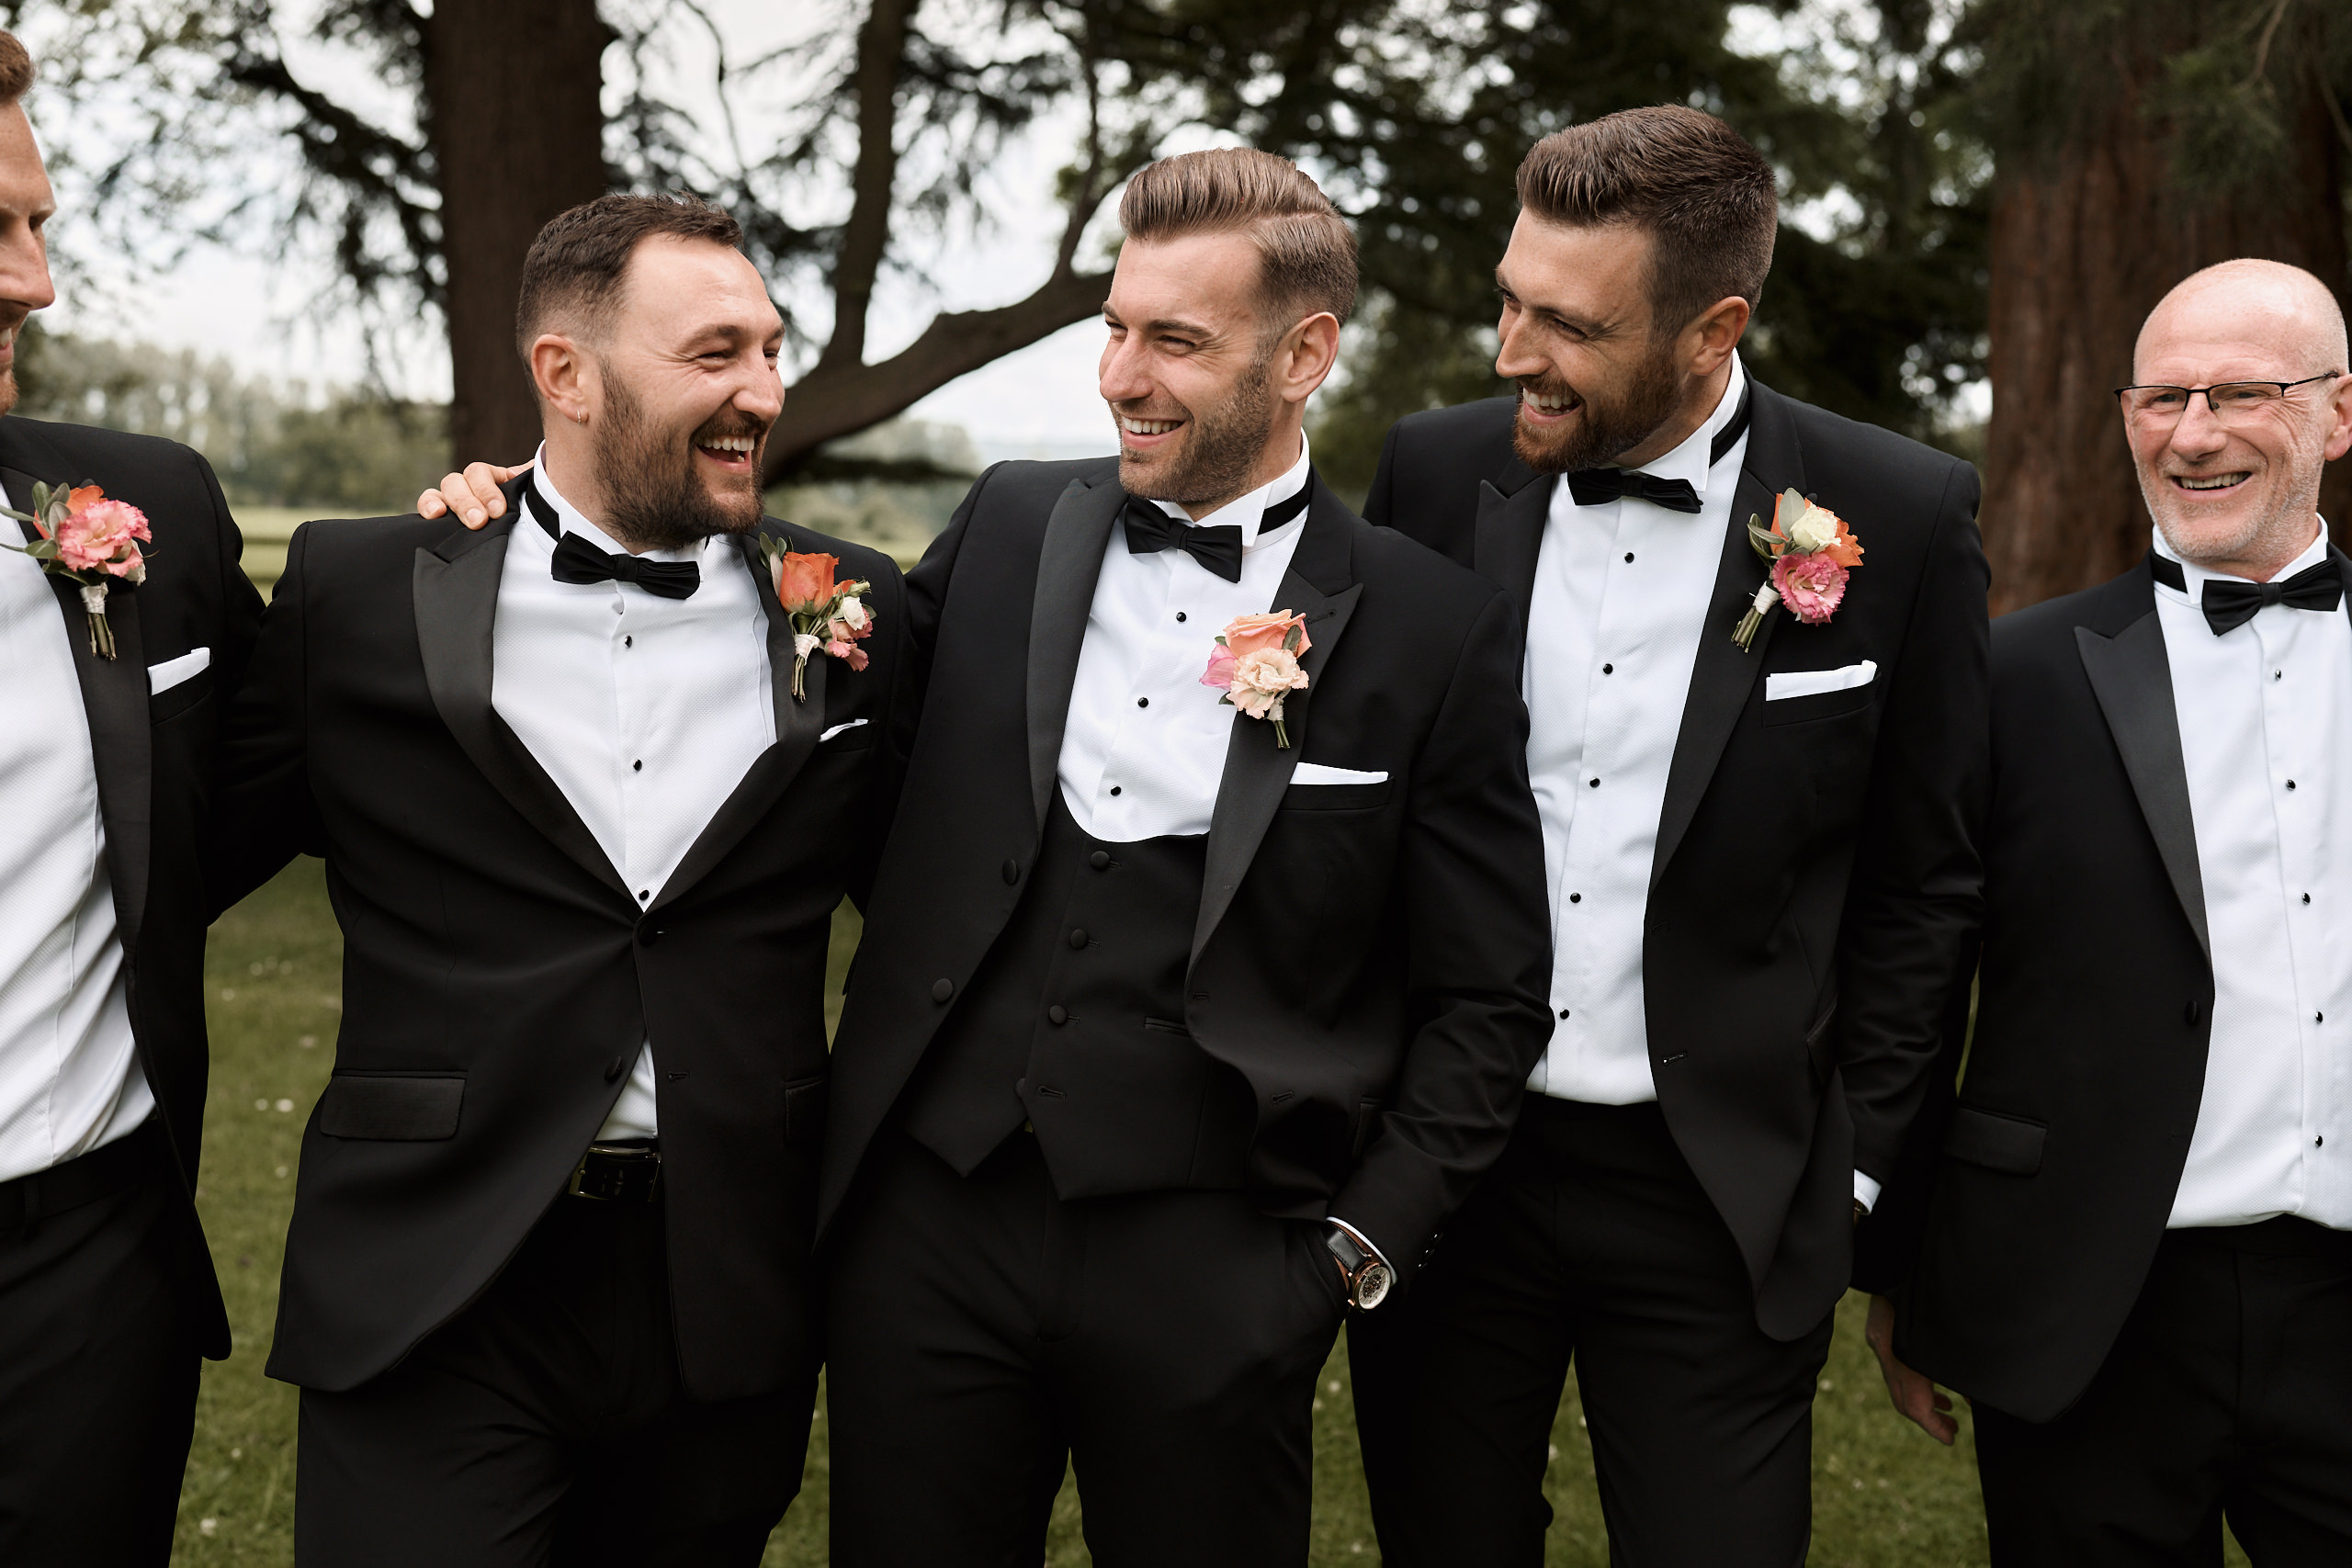 A group of groomsmen in tuxedos laughing together.